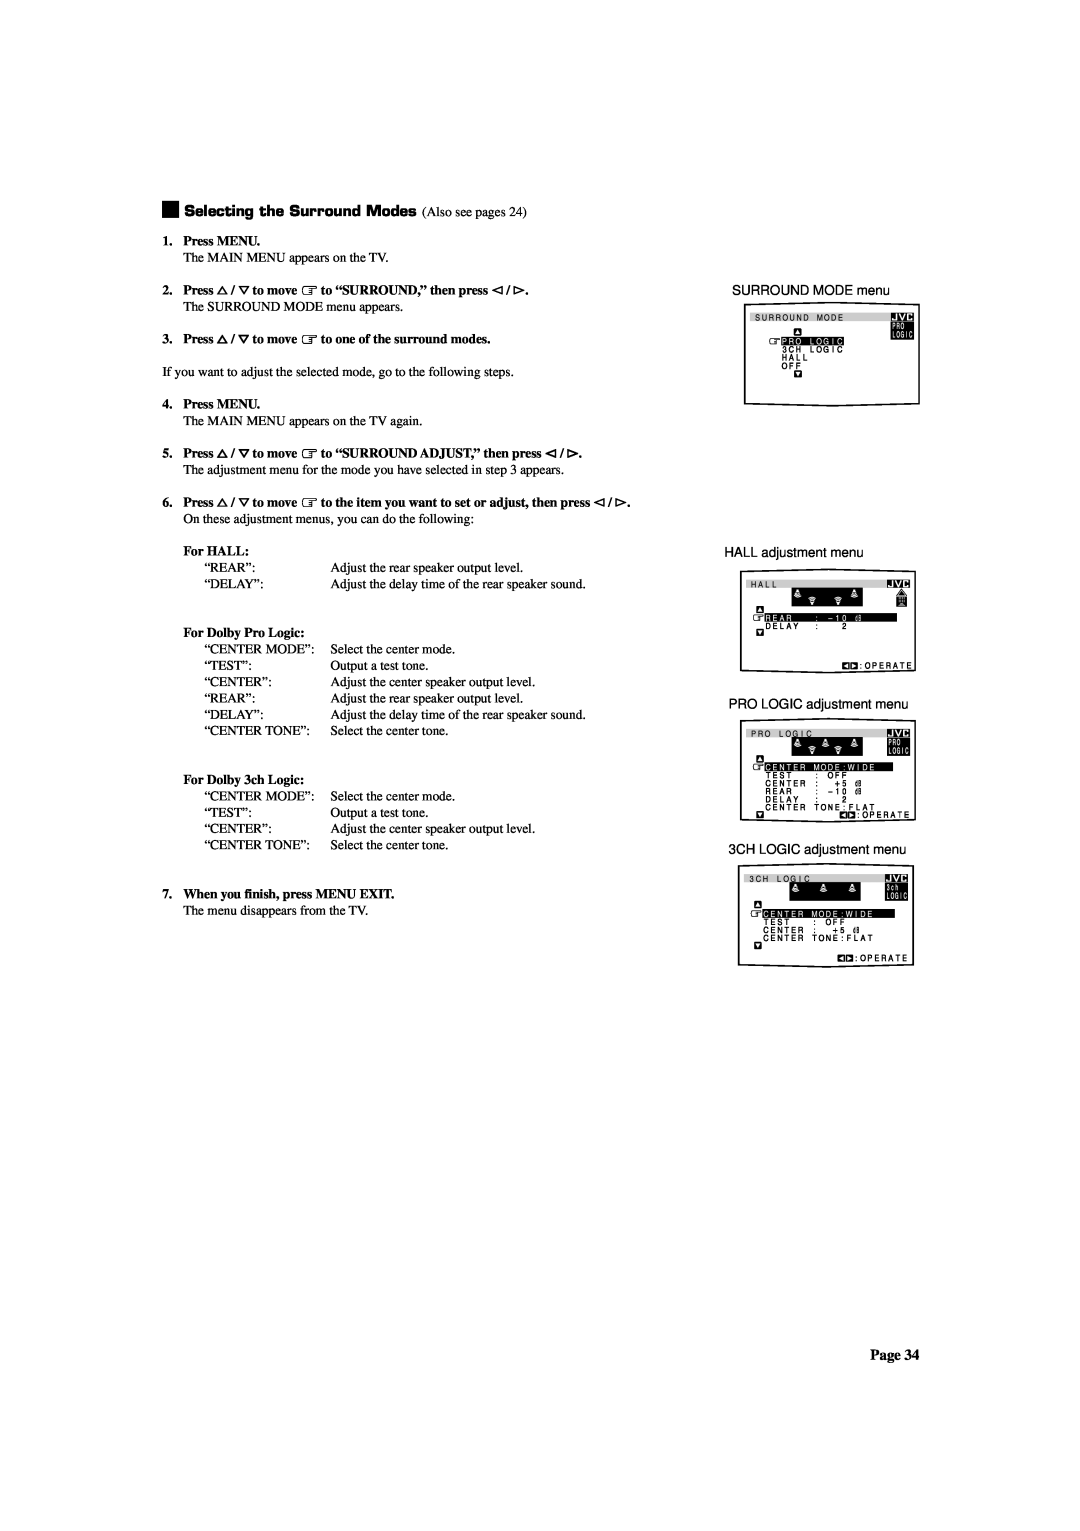 JVC RX-772VBK manual Selecting the Surround Modes Also see pages, 3CH LOGIC adjustment menu 